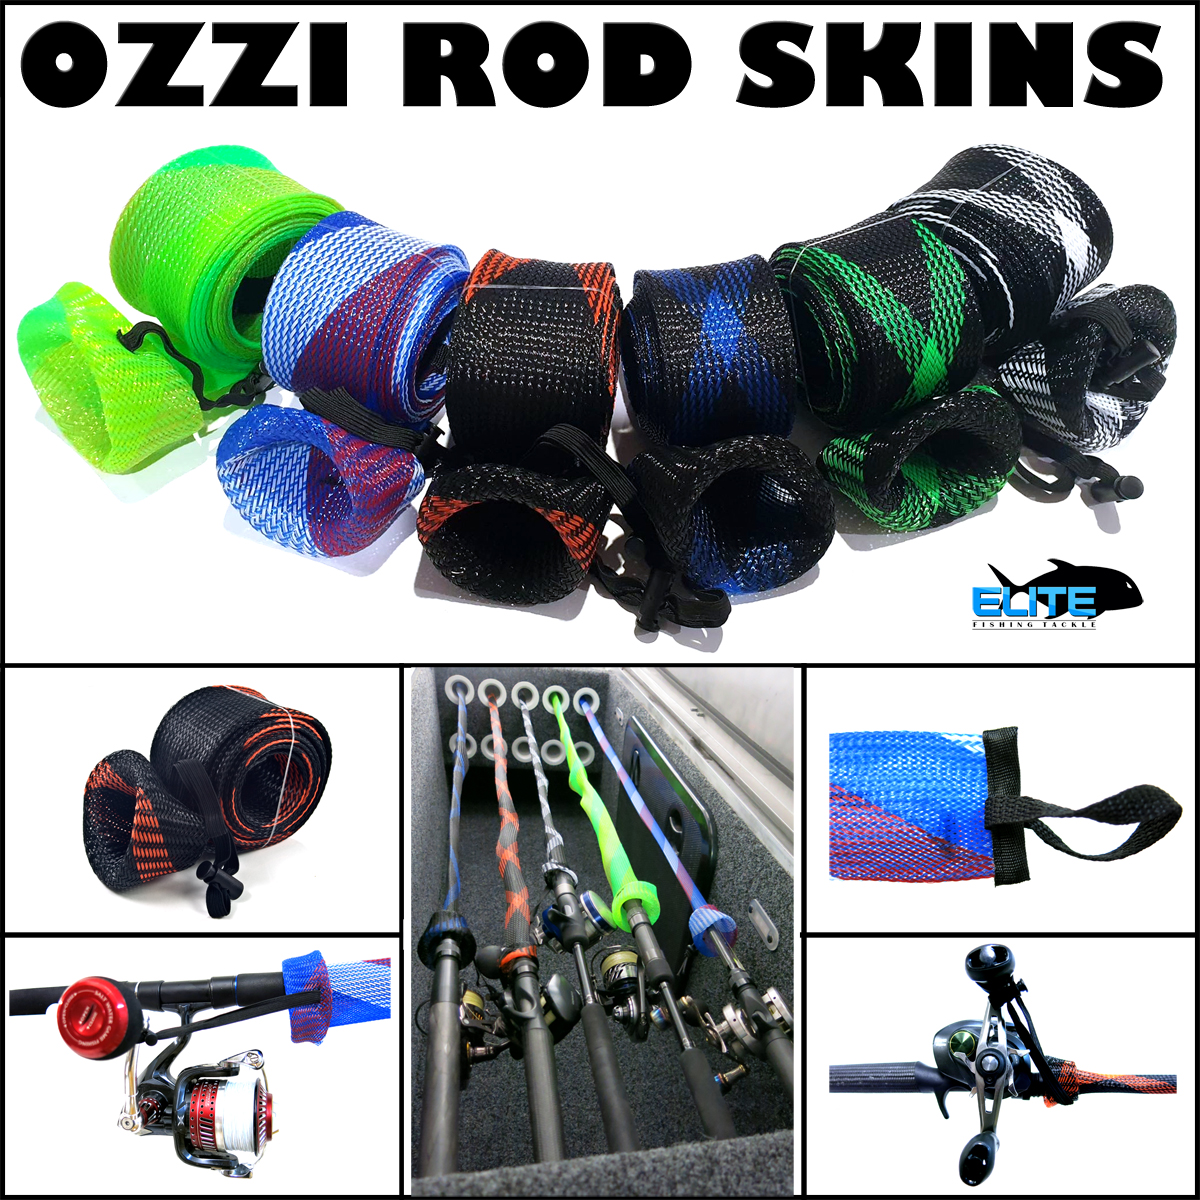 Ozzi Rod Skin (rod covers for overhead and spin rods)